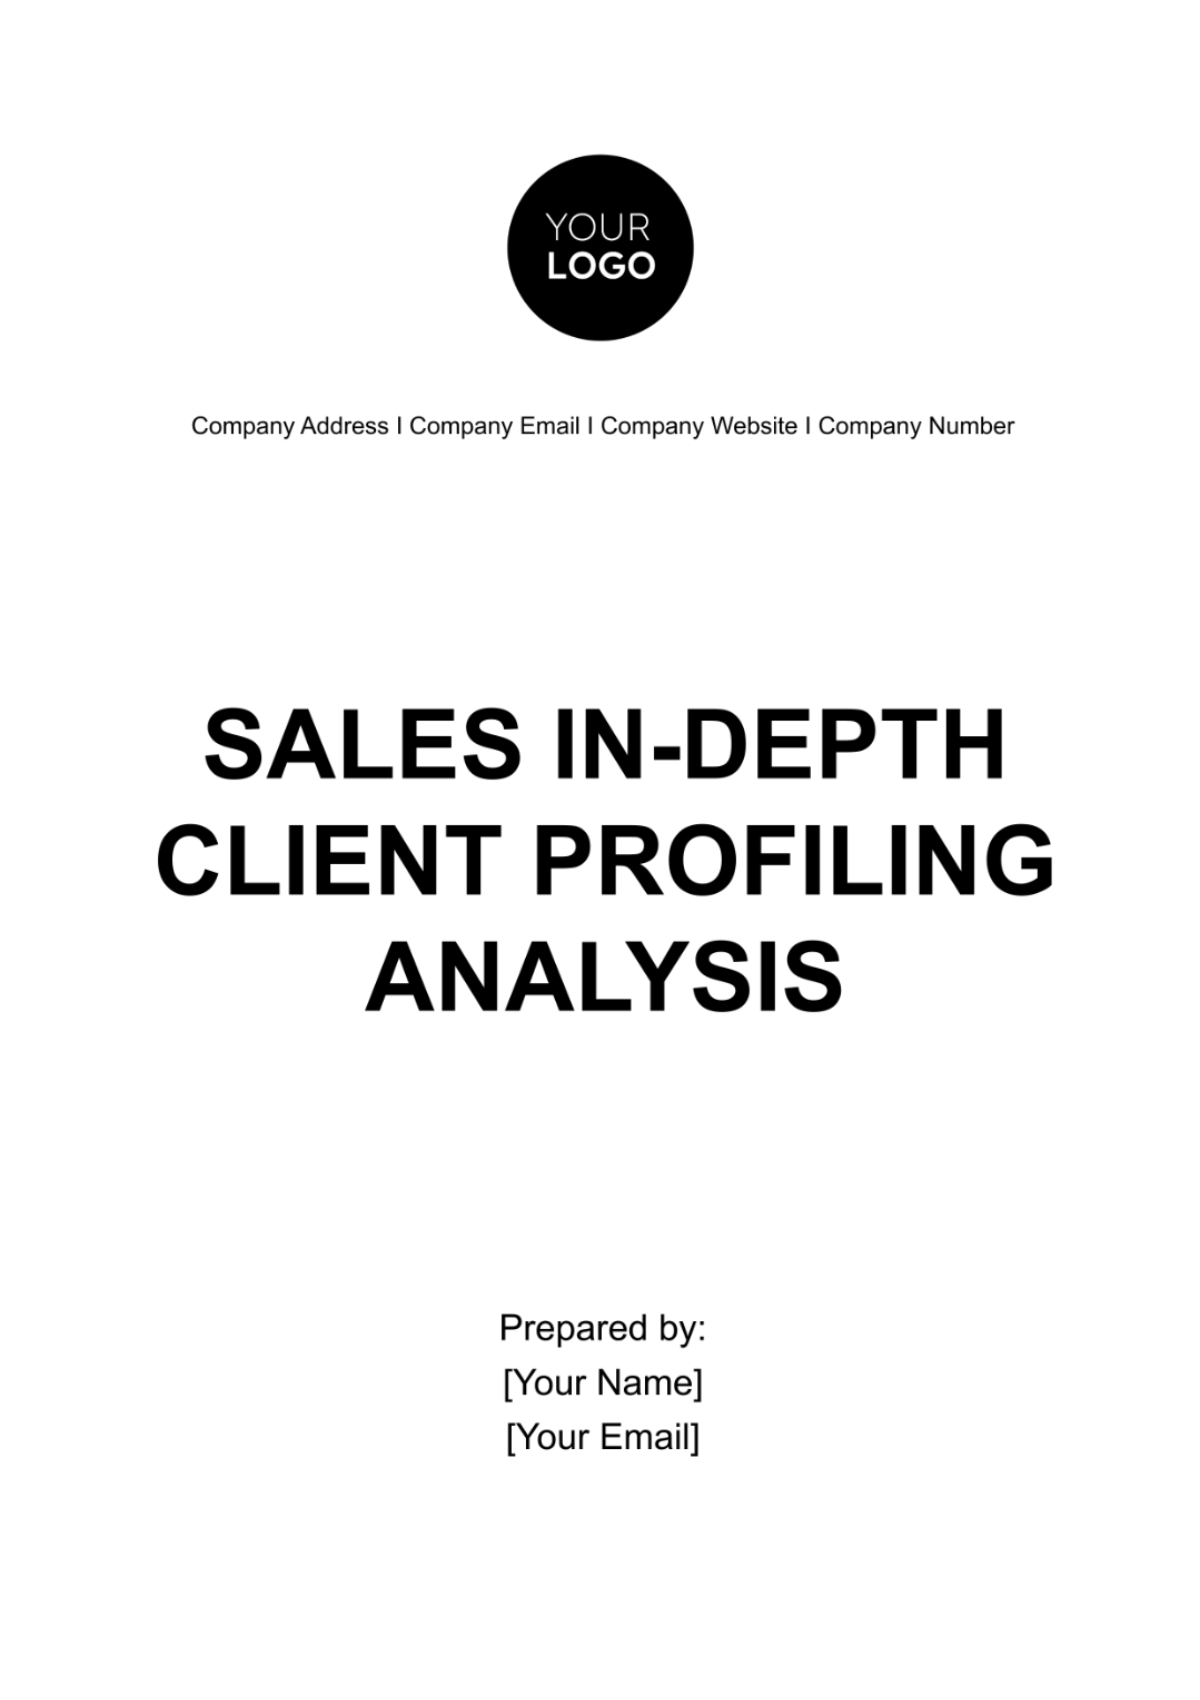 Sales In-depth Client Profiling Analysis Template